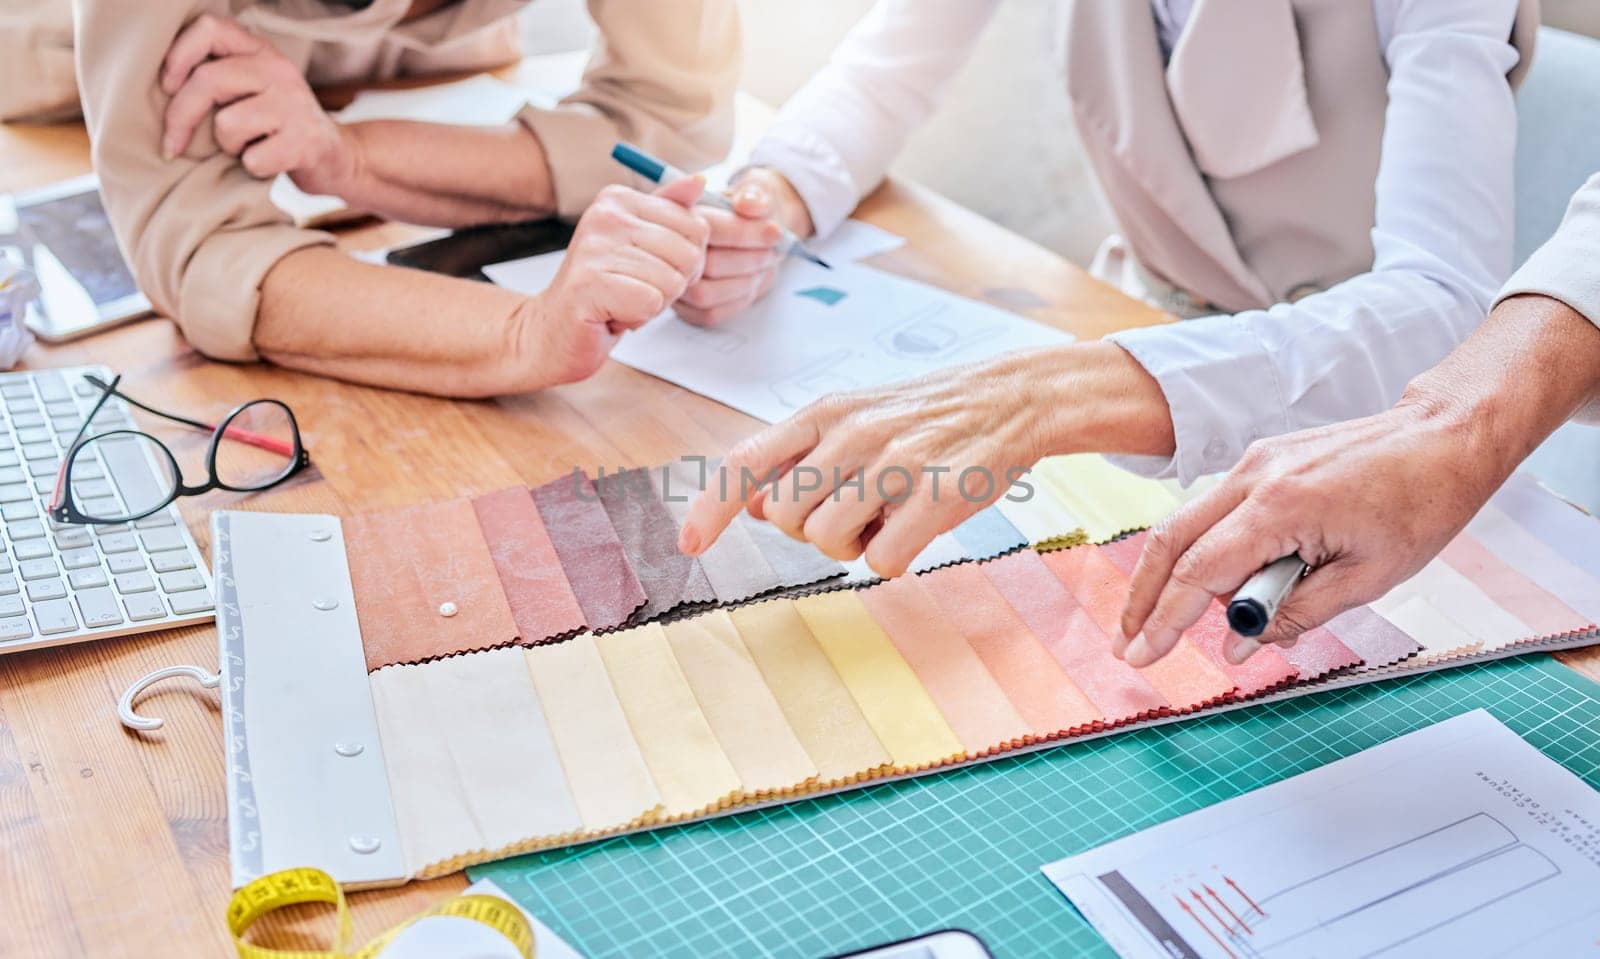 Planning, fabric choice and fashion hands in creative project, collaboration and textile design. Startup, development and studio, workshop or manufacturing people ideas, art vision and color palette.